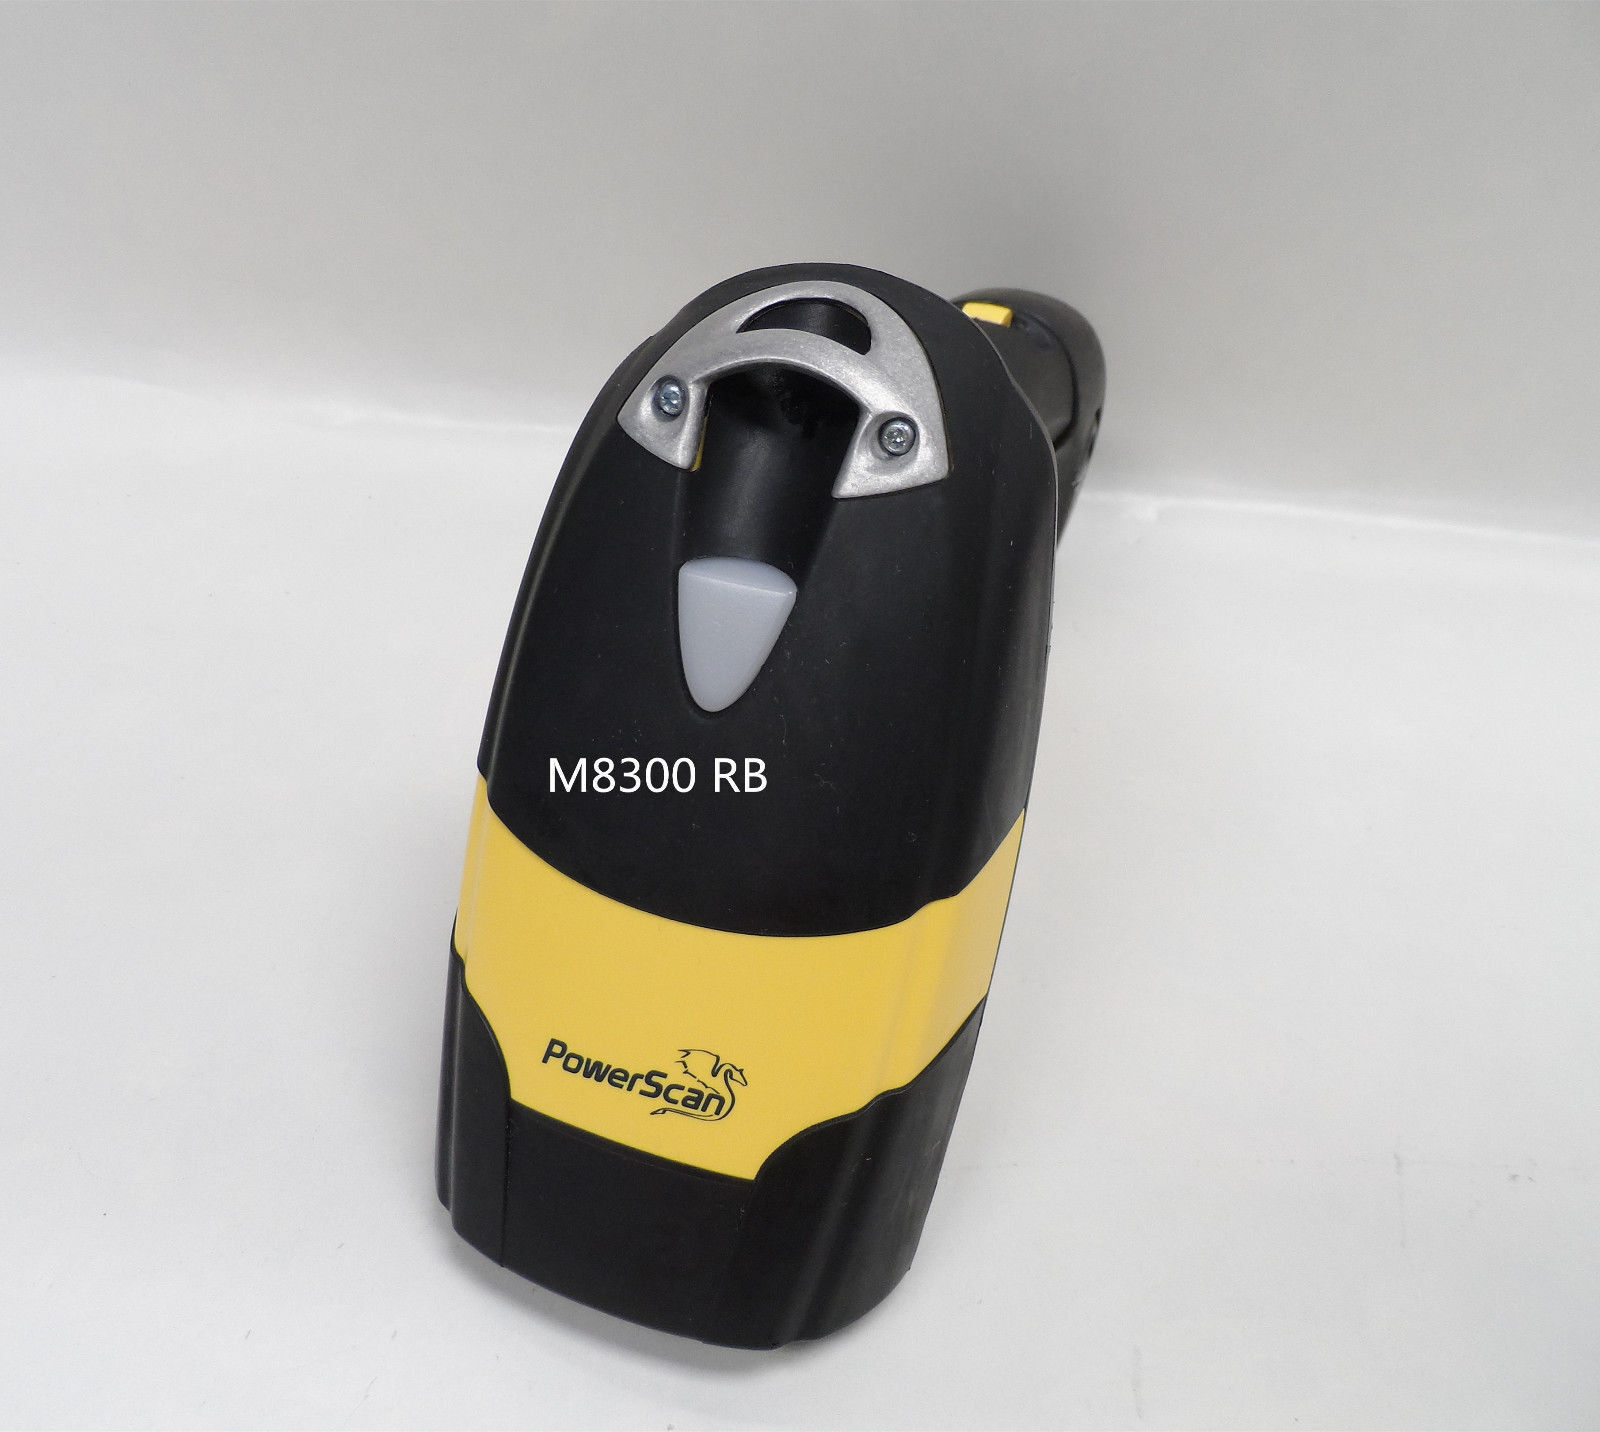 Datalogic Powerscan PM8300 Barcode Scanner M8300 910Mhz RB with Battery only